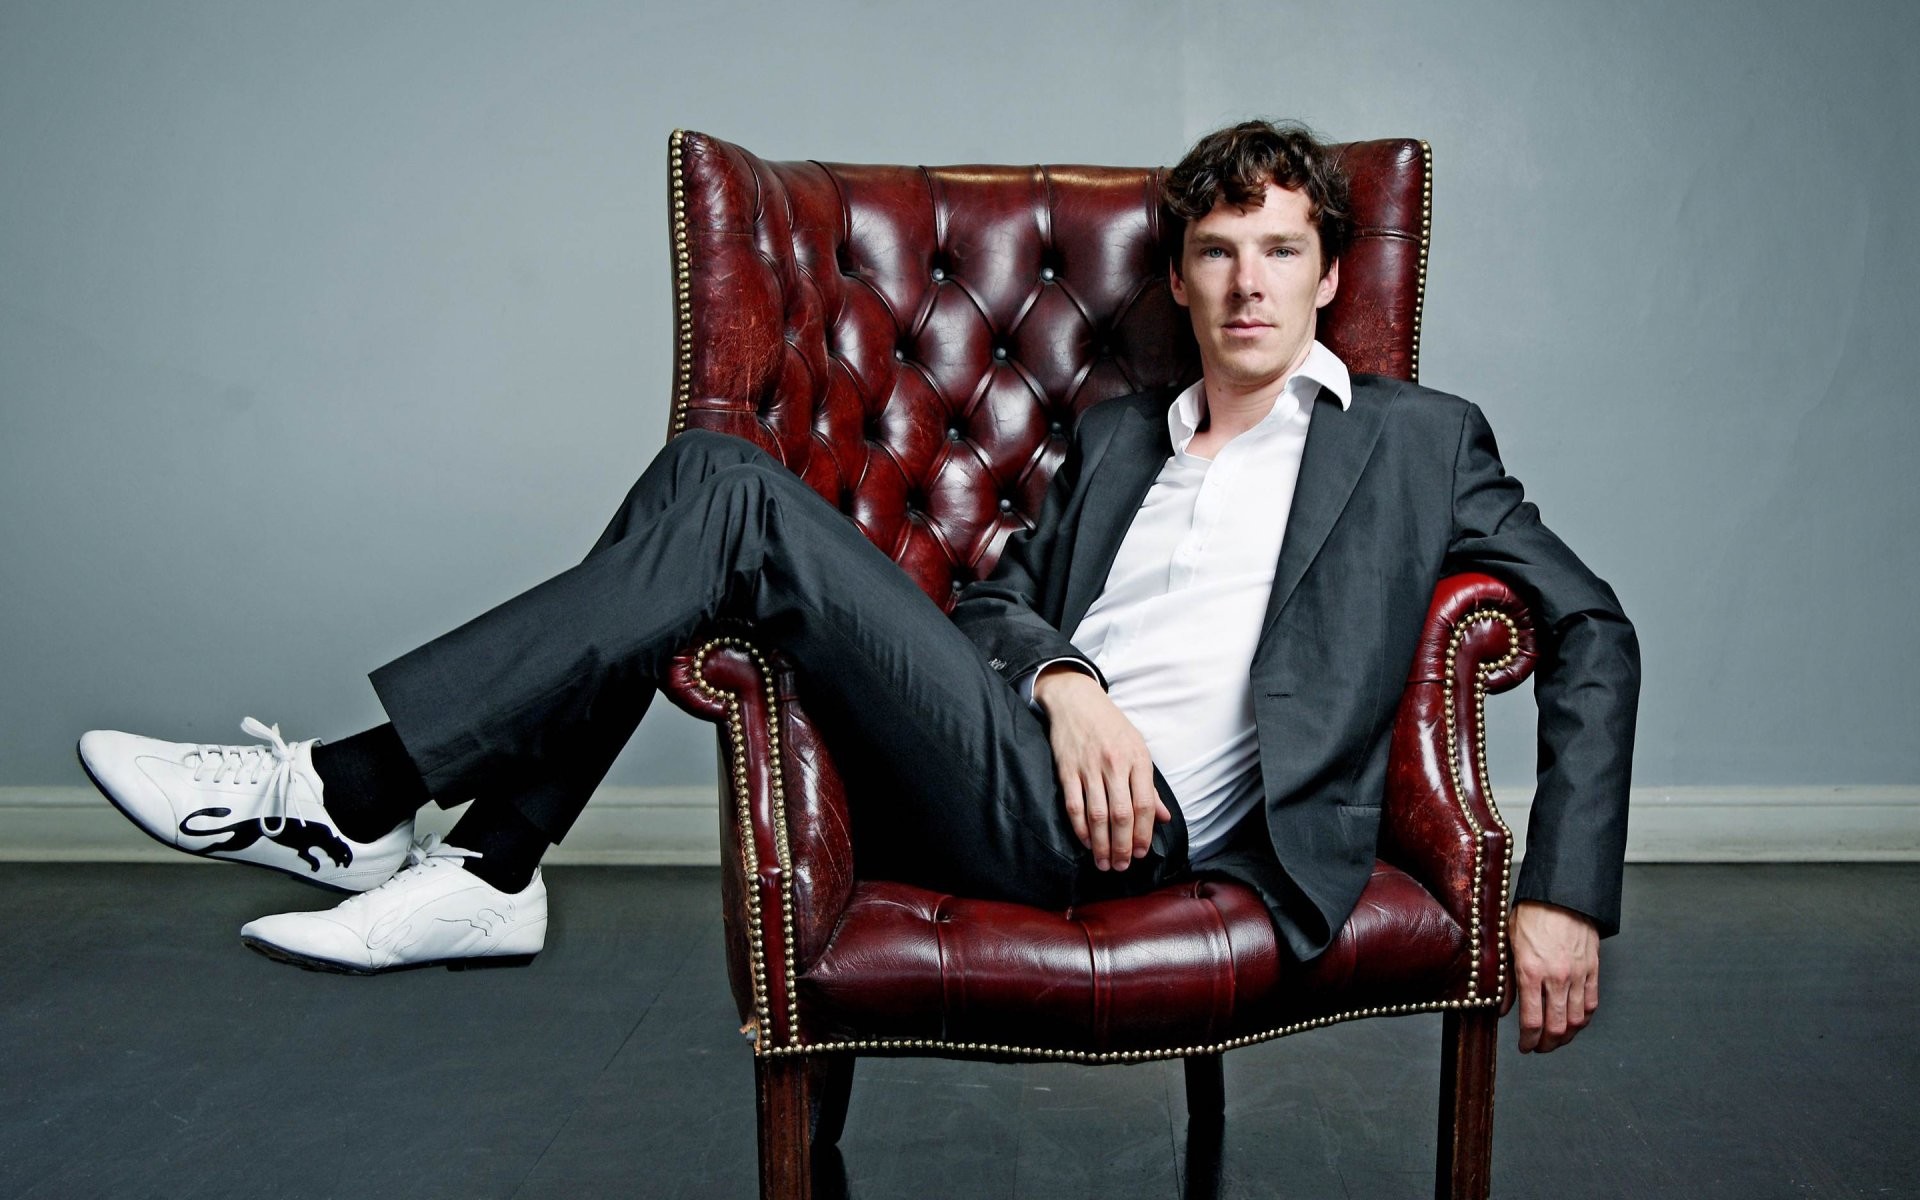 Benedict Cumberbatch Wallpaper Pictures On Greepx